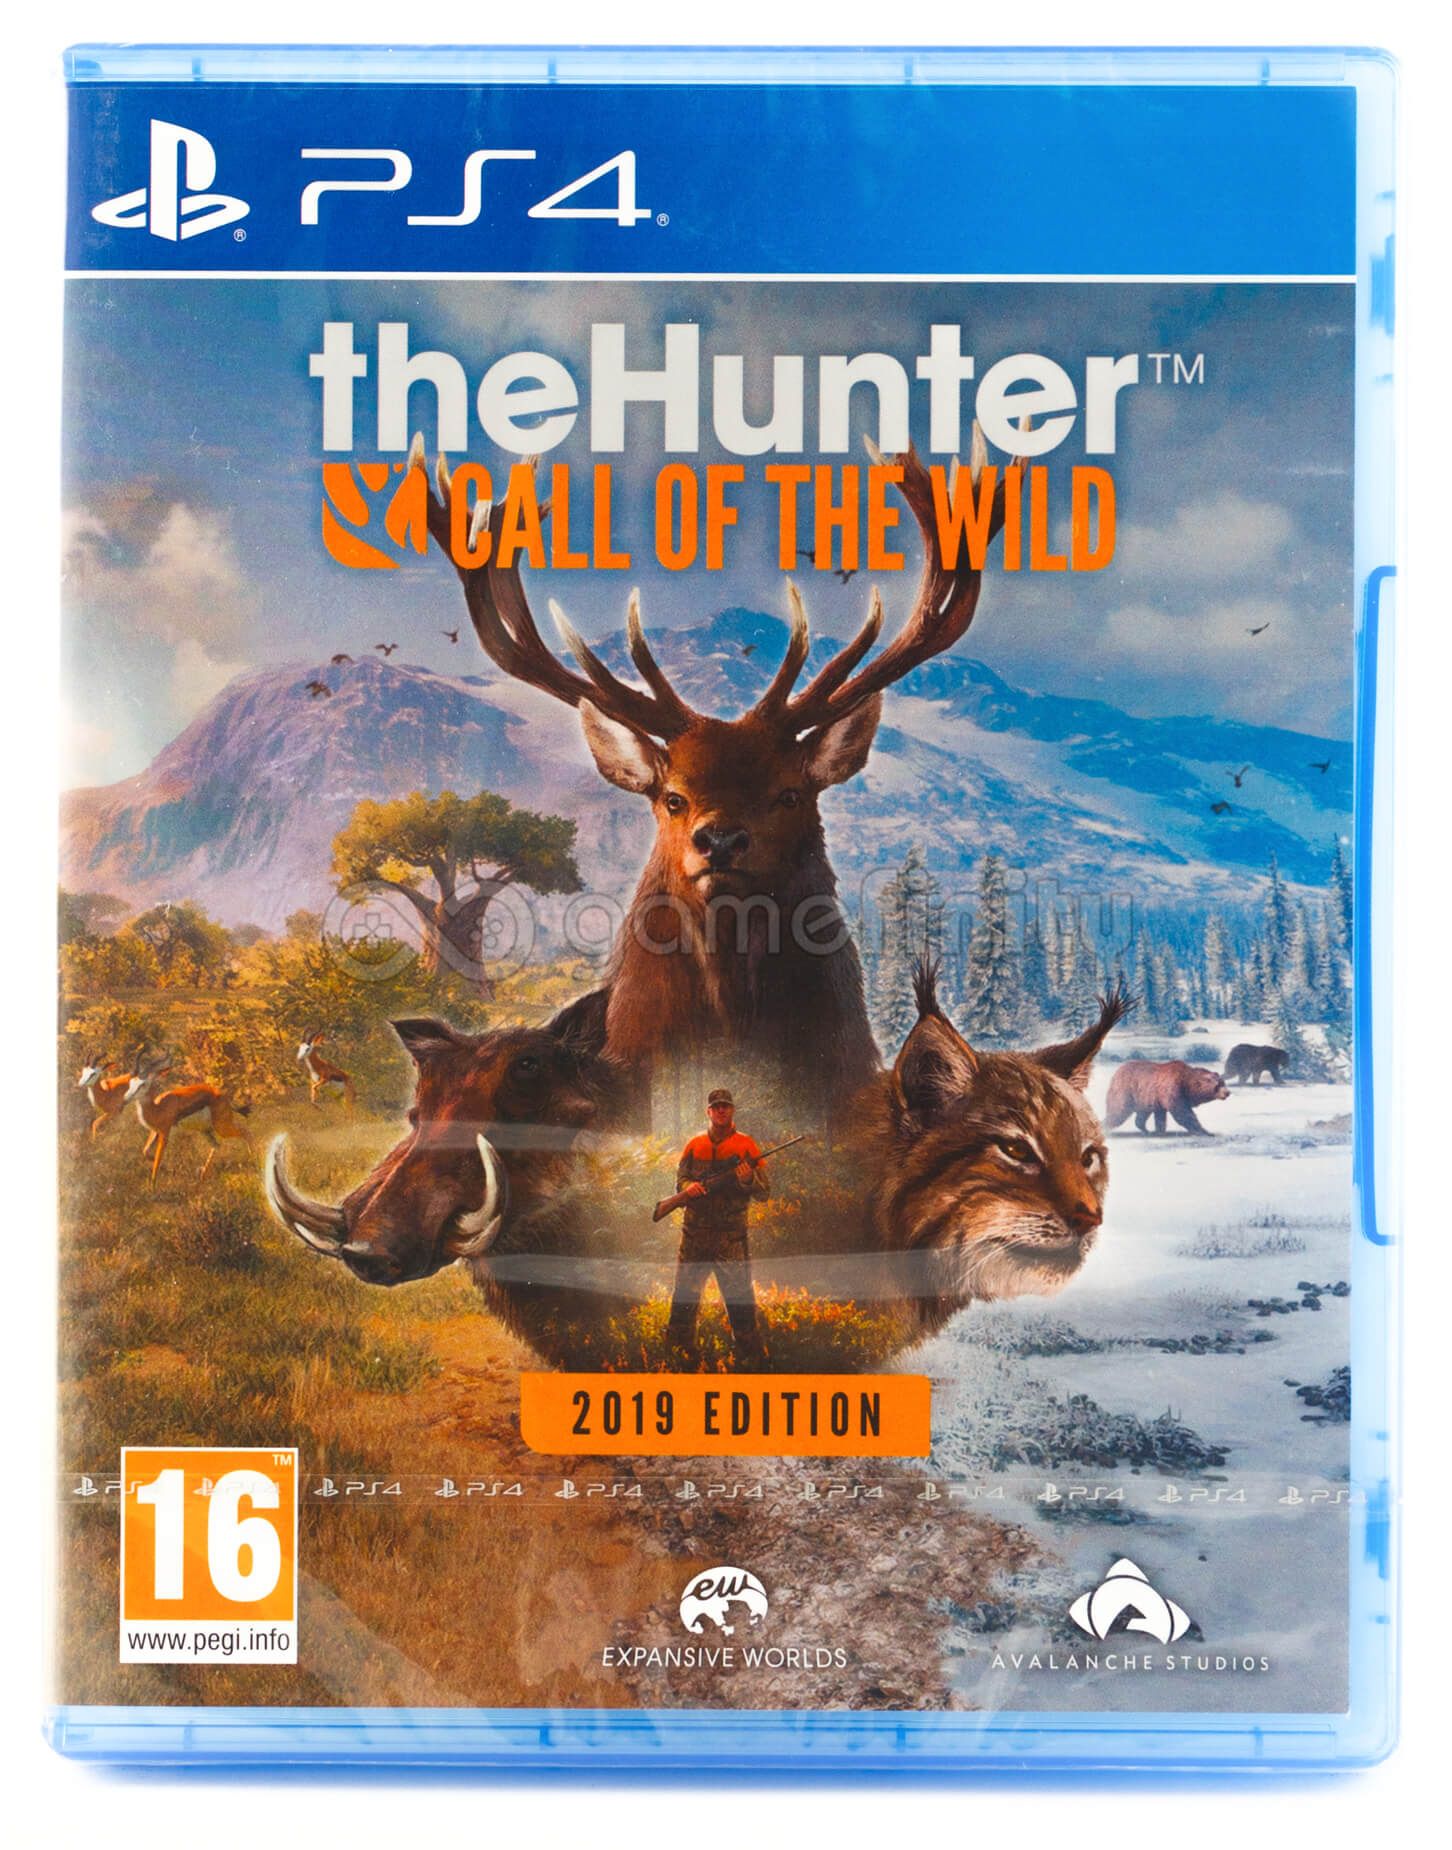 The Hunter Call of the Wild ps4. The Hunter Call of the Wild обложка. Диск the Hunter Call of the Wild ps4 обзор. The Hunter Call of the Wild купить. Wild ps4